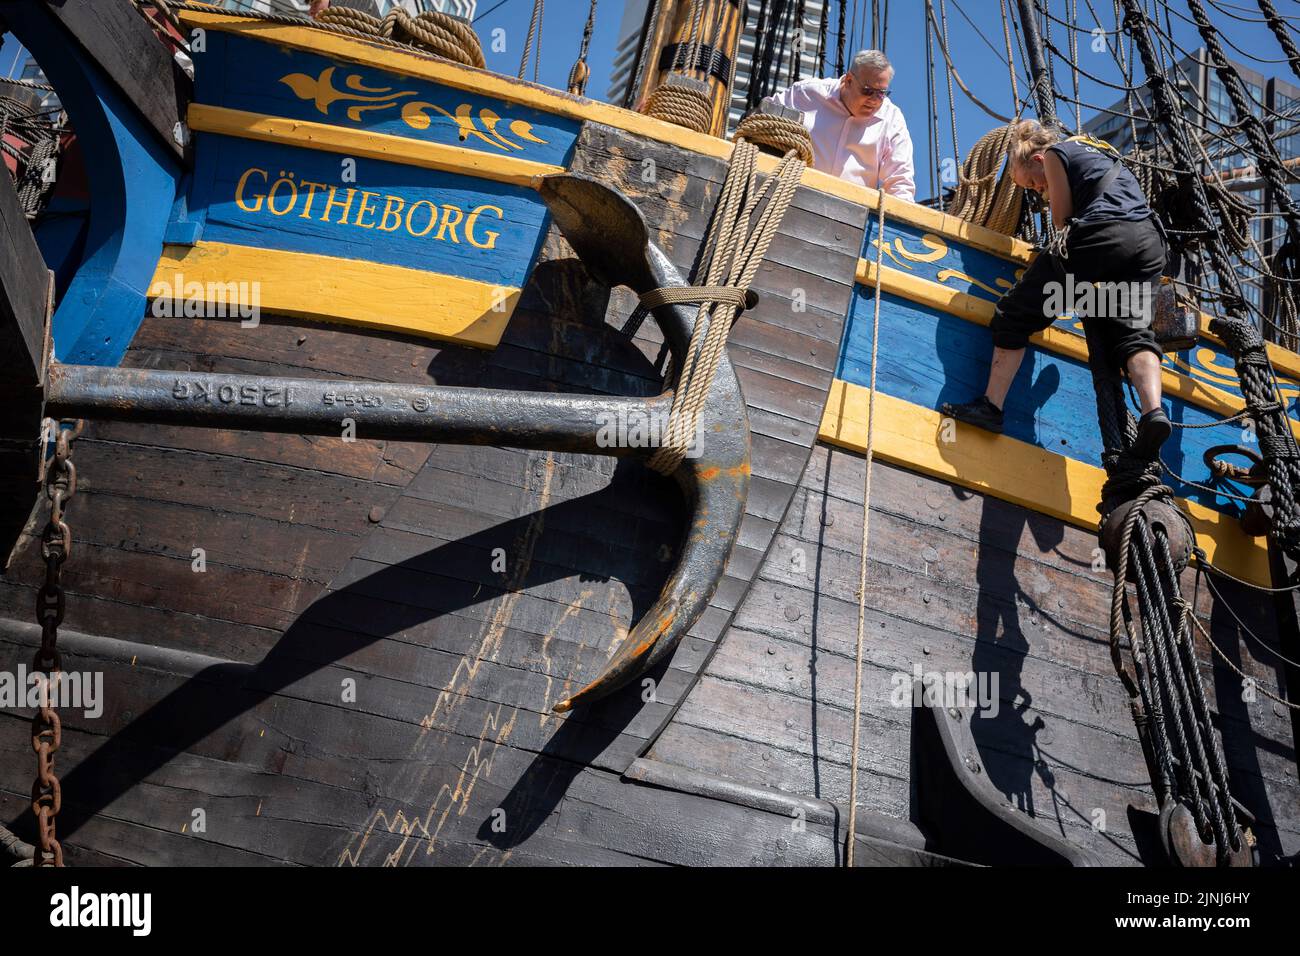 The crew of the replica sailing ship, Gotheborg, perform repairs and maintenance while docked beneath the high-rise towers at South Quay, Canary Wharf in London Docklands, during its four-day visit to the capital before it continues its two-year around the world expedition to Shanghai, China, on 9th August 2022, in London, England. Londoners are invited to tour the decks of this facsimile of the original ship which sank off the Swedish coast in 1745. Its main cargo would have been tea, porcelain, herbs and silk on the China route. Stock Photo